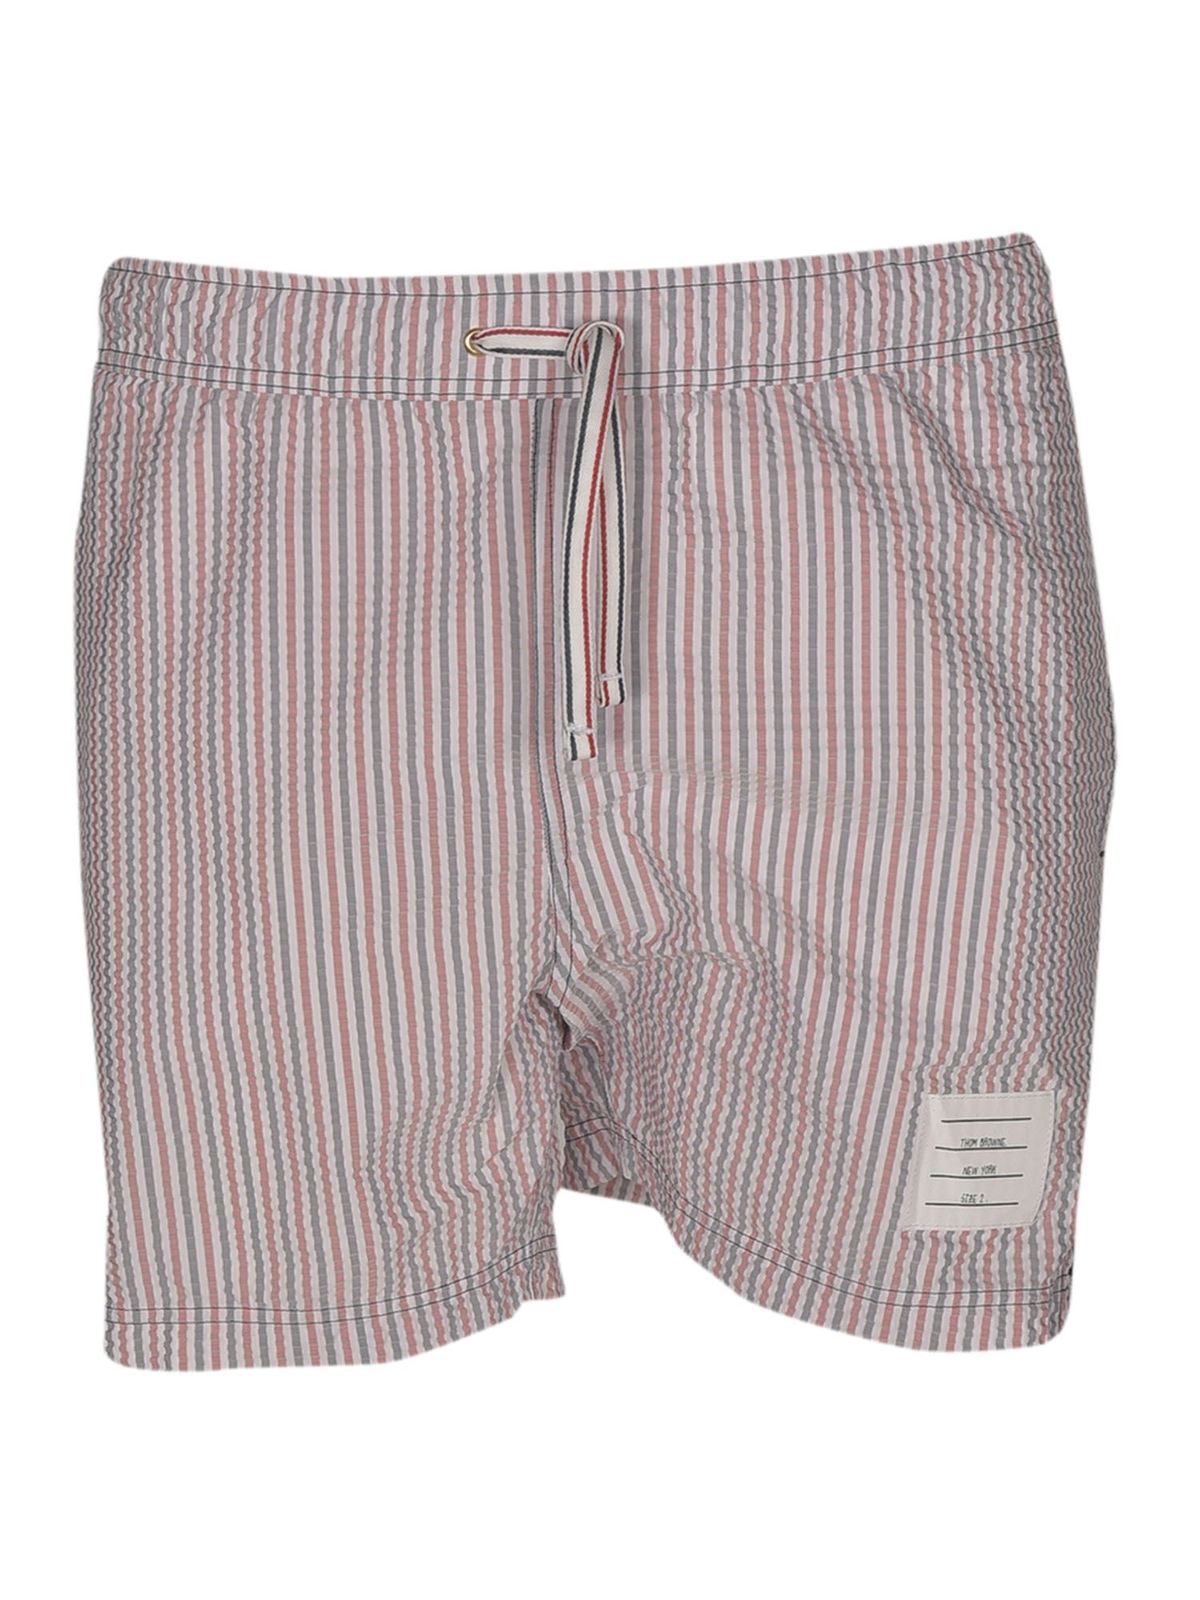 THOM BROWNE RED AND BLUE STRIPES SWIM SHORTS IN WHITE